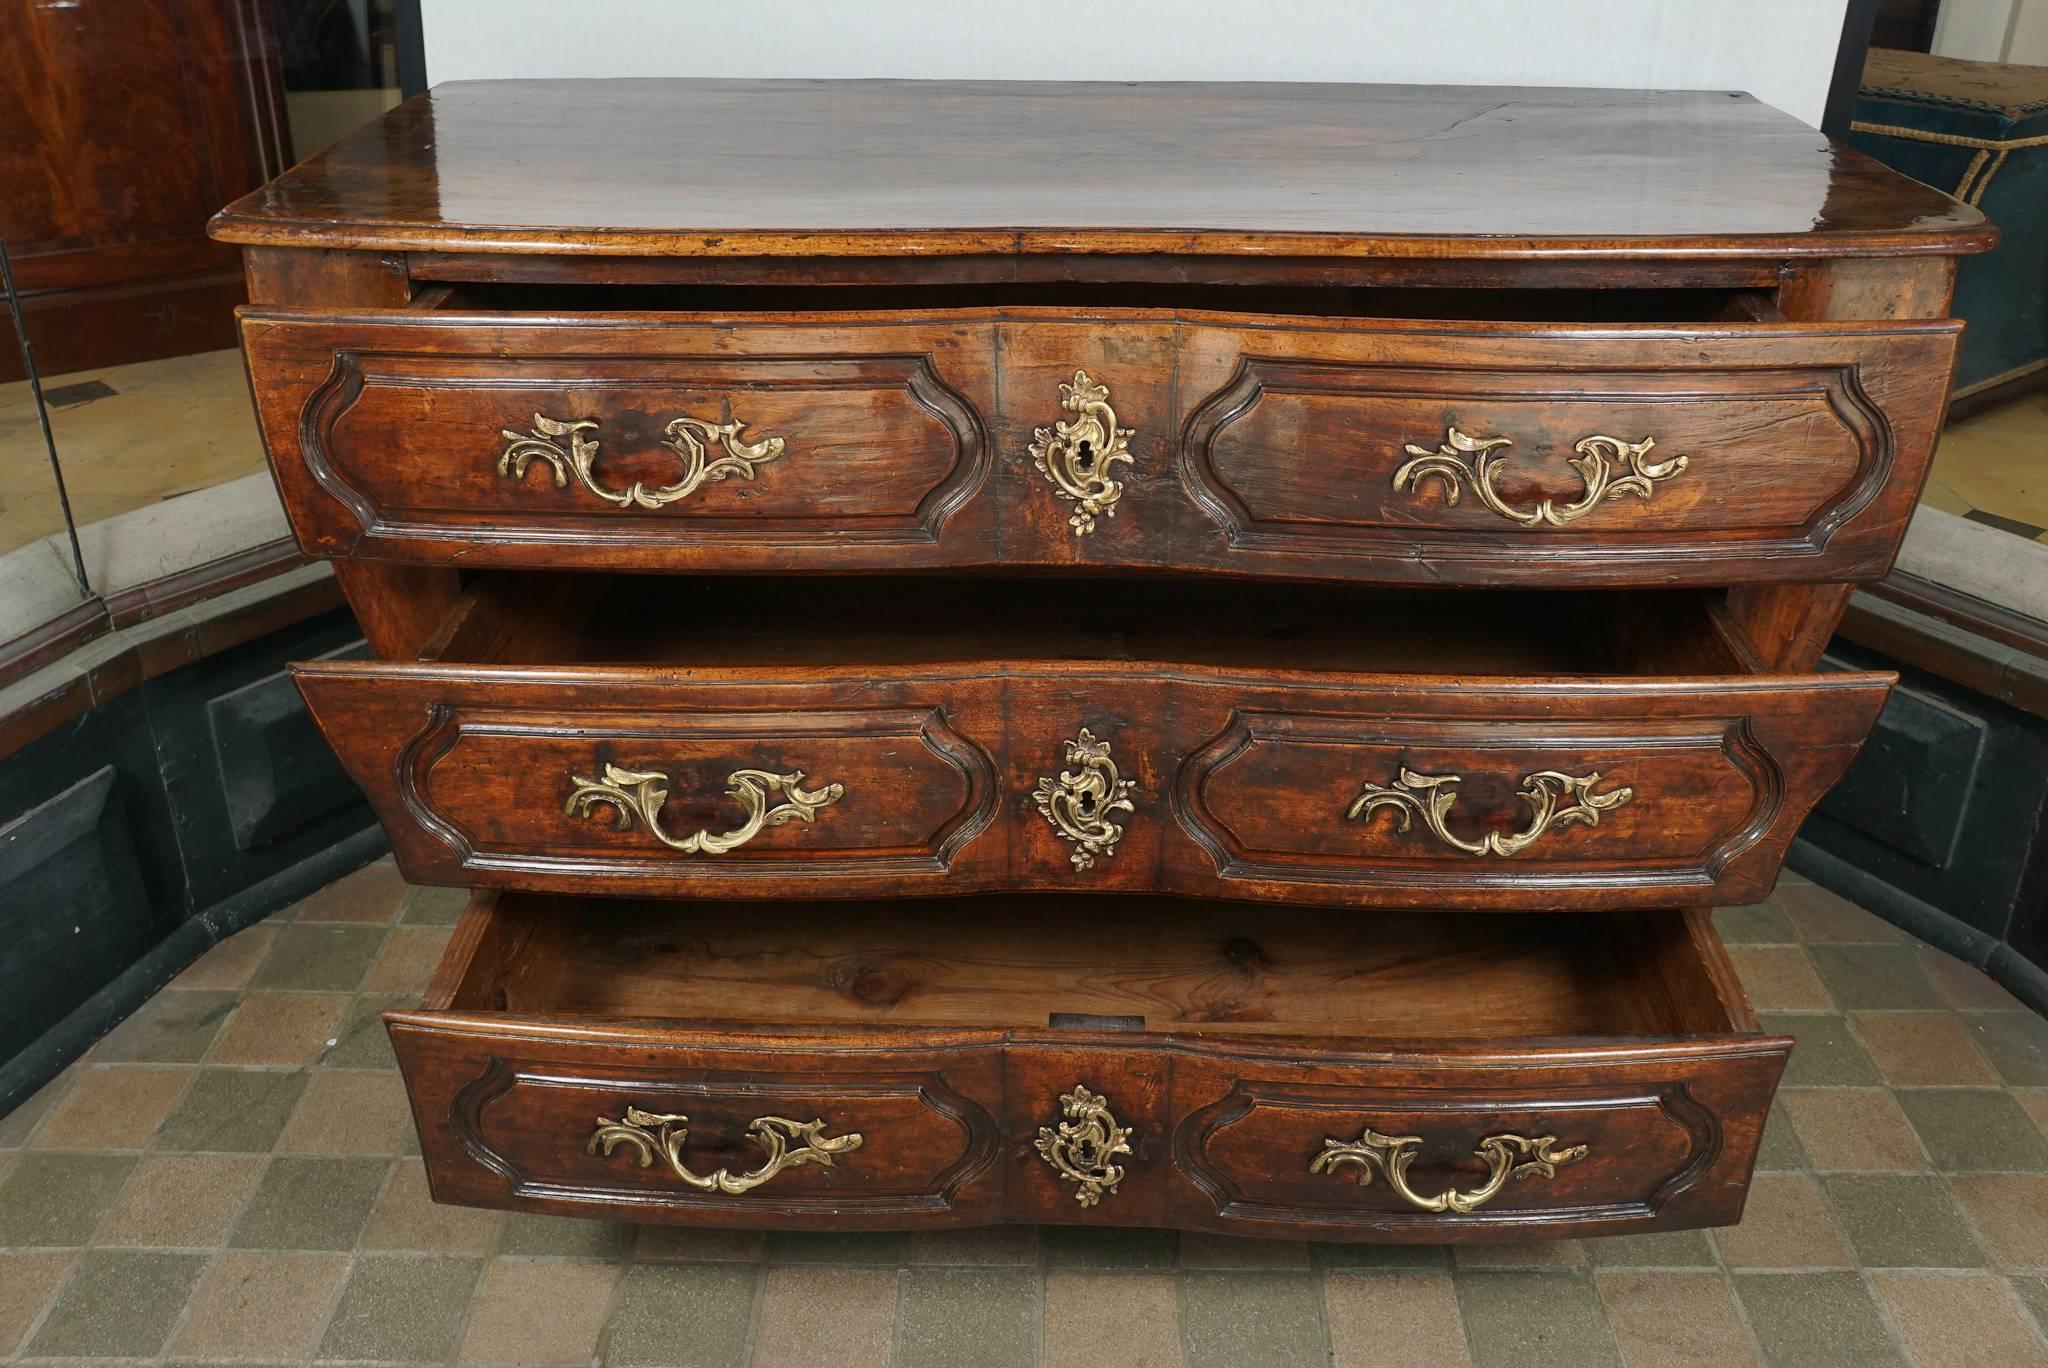 This very fine walnut commode bordelaise comes from France. Stained in a very deep warm brown, Provincial in style and created circa 1750 during the reign of King Louis XV this commode retains a wonderful rich color and style. The carving is deep